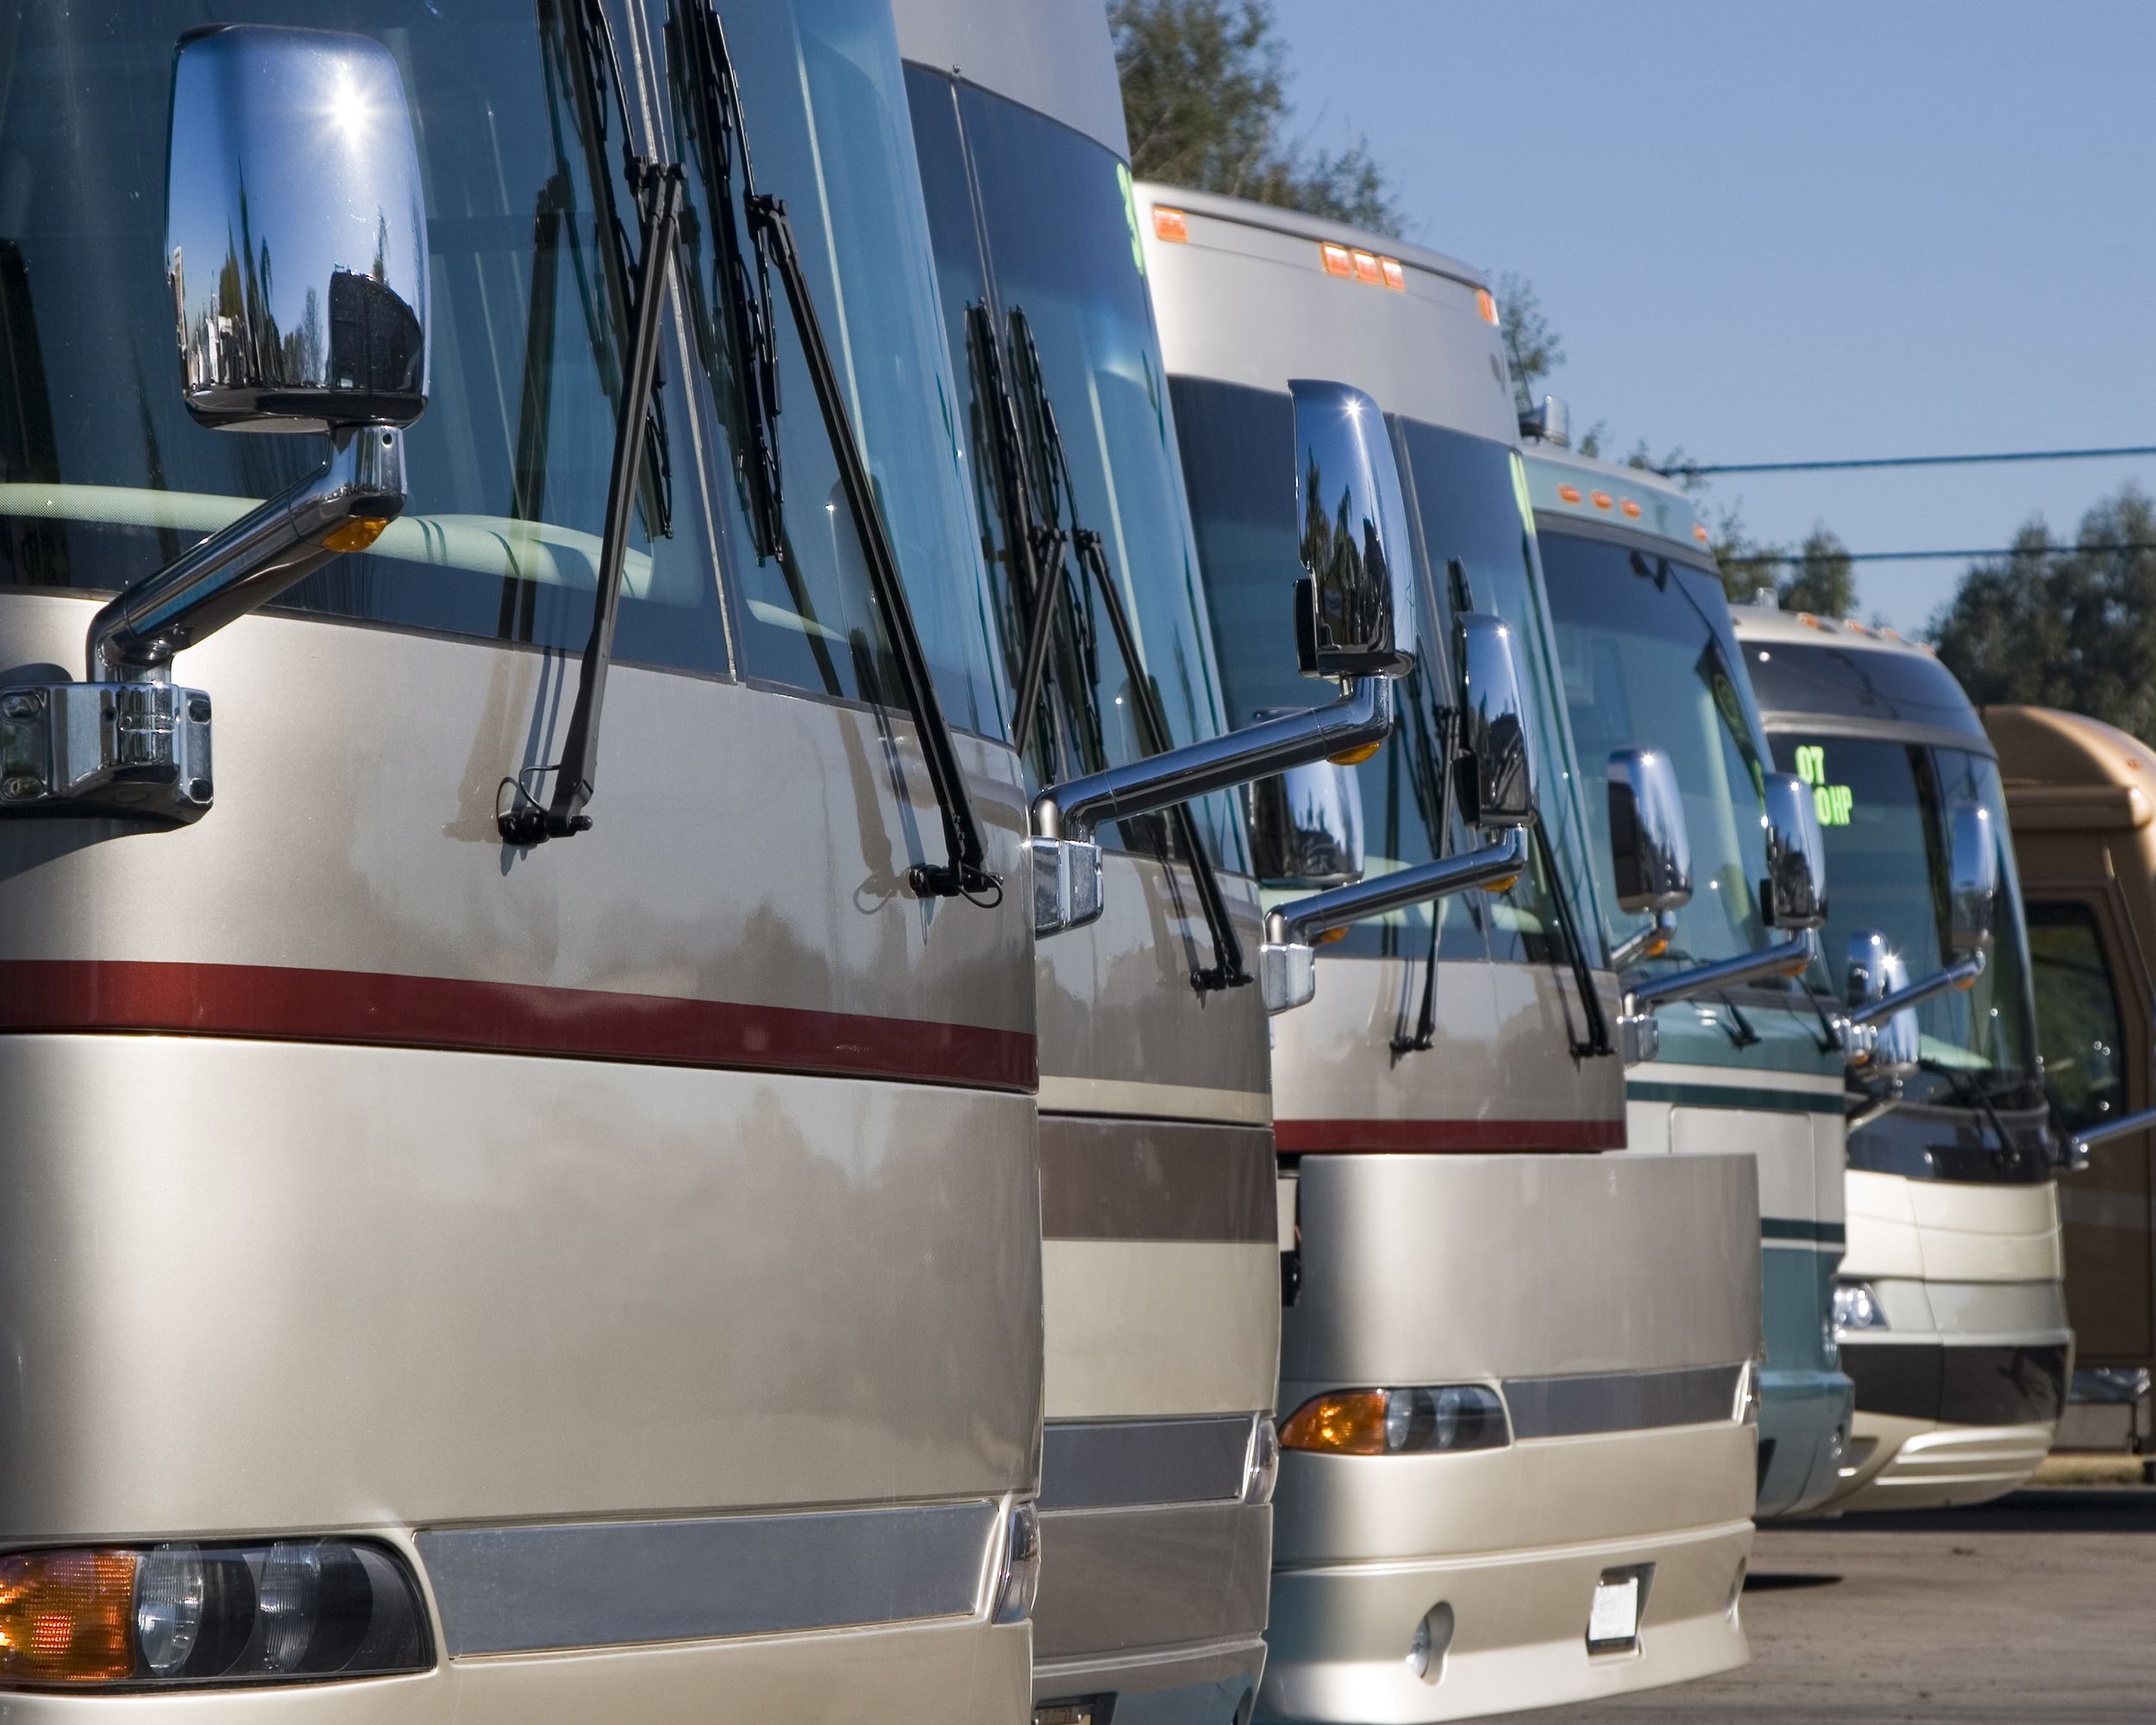 Most buyers’ budgets will determine their options, and motorhomes cost big bucks. “A nice motorhome fully decked out can cost $100,000 or more,” Jon says. “That’s a lot of money for a vehicle that will just sit in your driveway most of the year. Whereas a nice travel trailer will run about $20,000, so it might make more sense for a low-usage situation.”